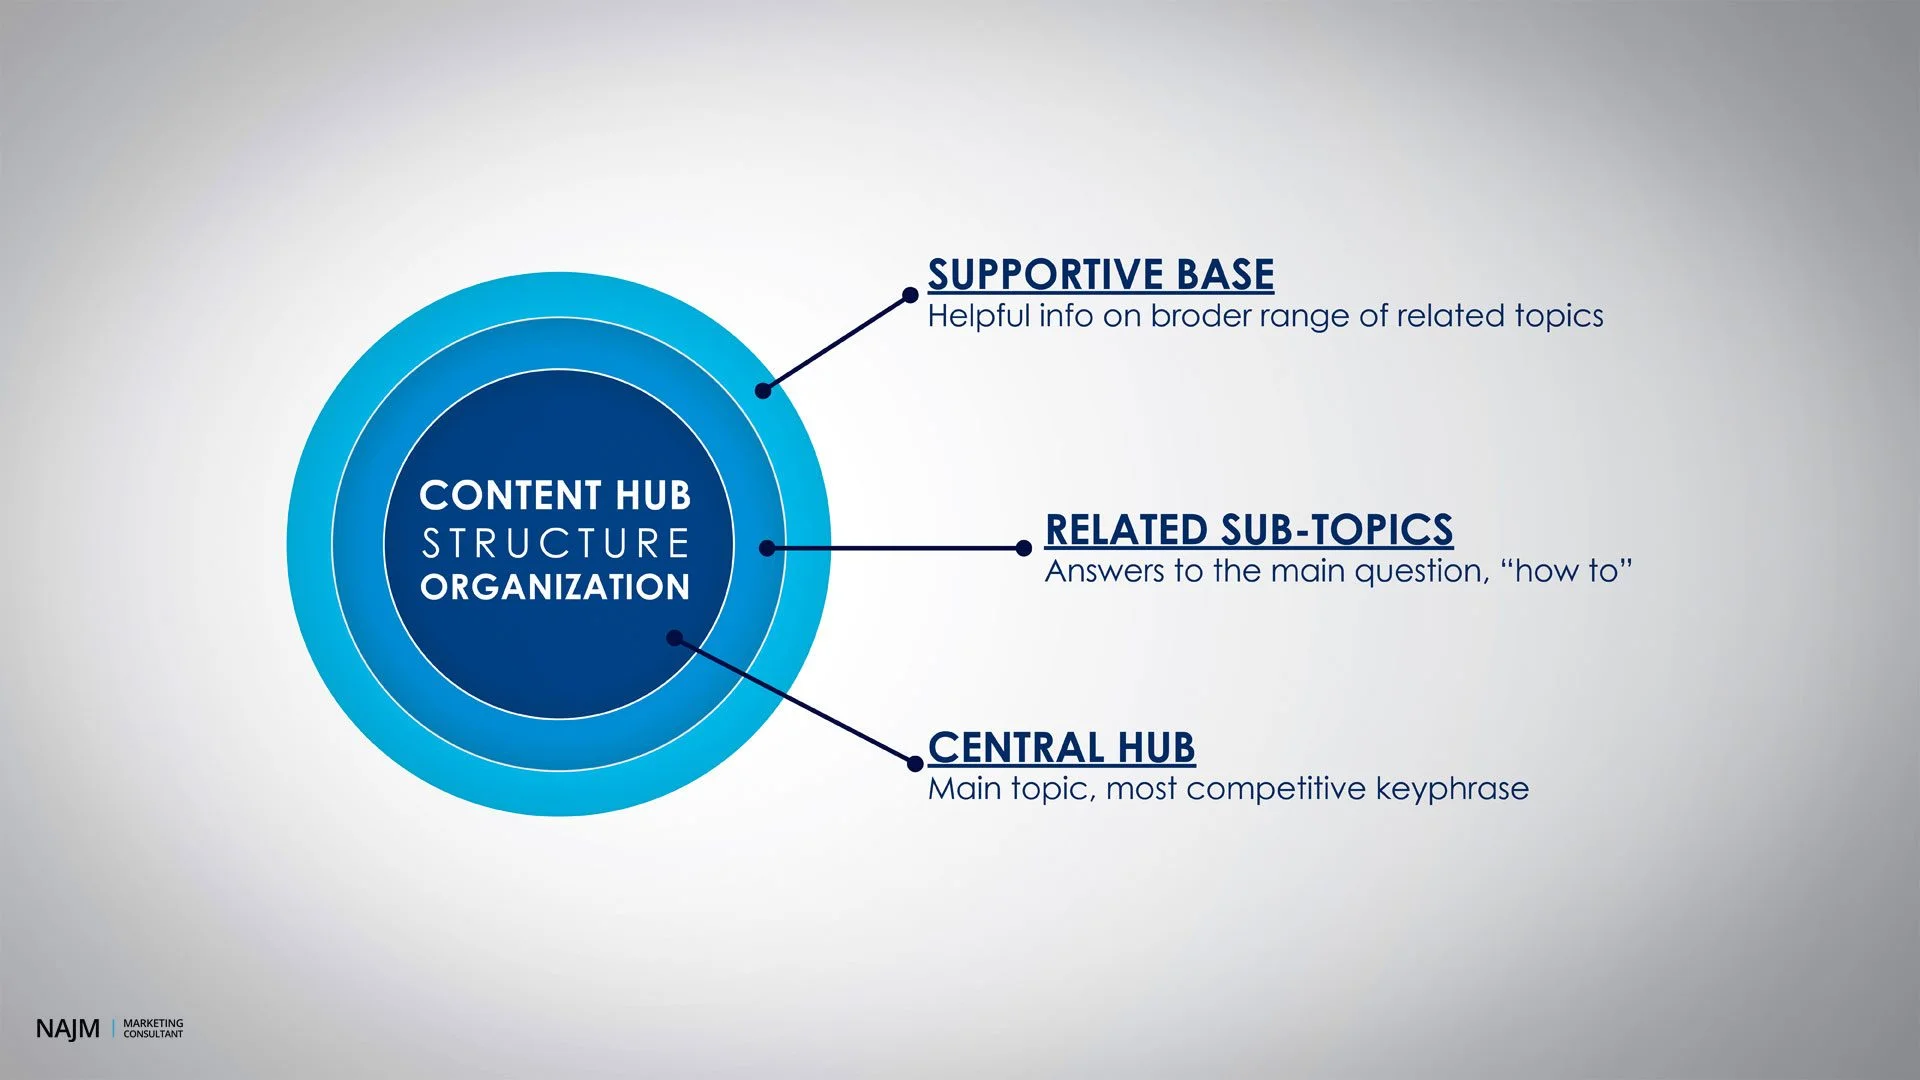 Content Hub structure
